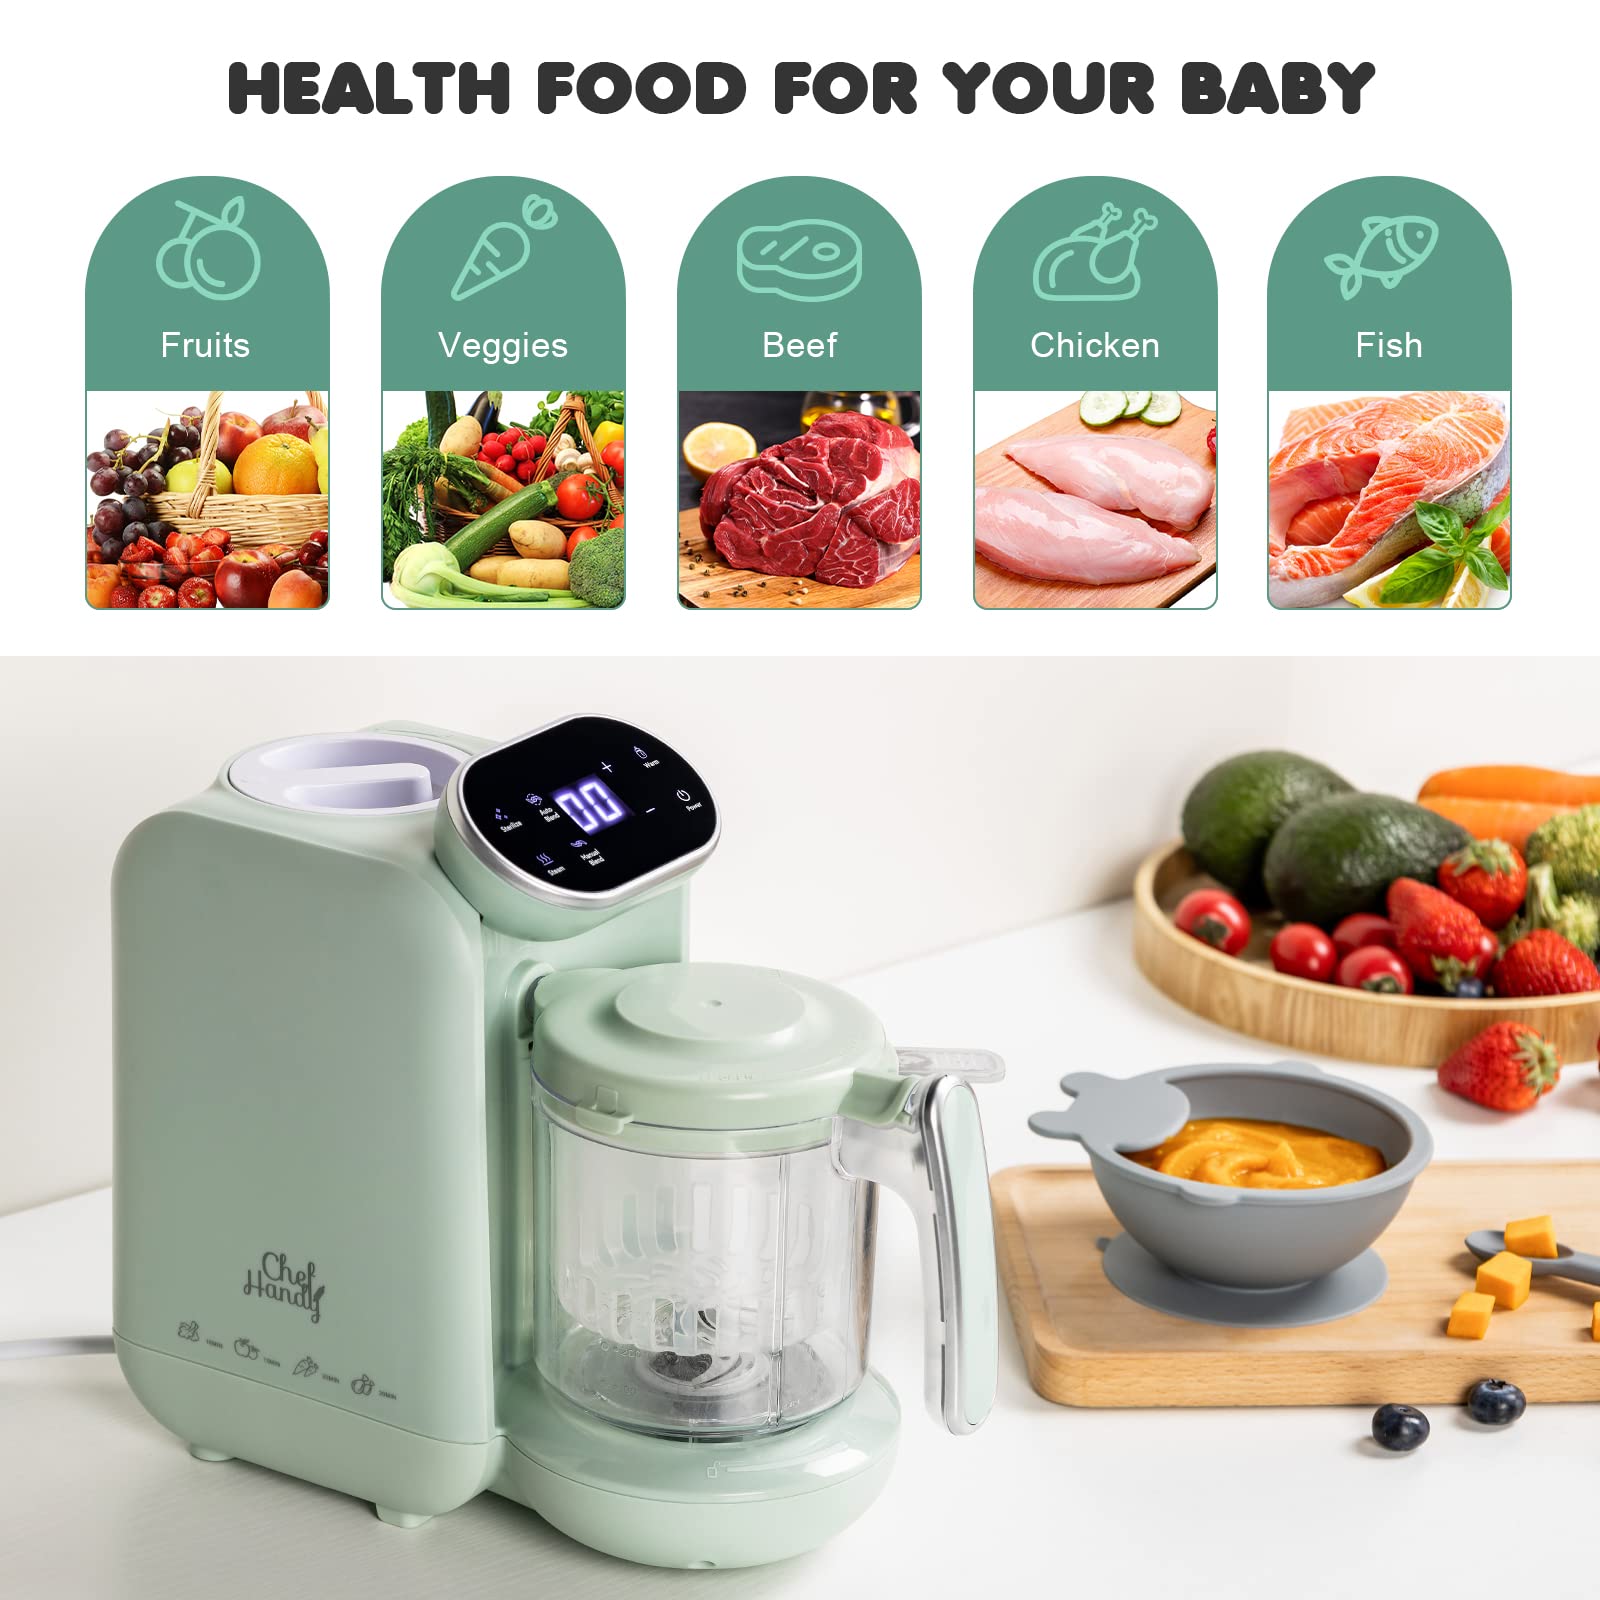 Baby Food Maker, 5 in 1 Baby Food Processor, Smart Control Multifunctional Steamer Grinder with Steam Pot, Auto Cooking & Grinding, Baby Food Warmer Mills Machine